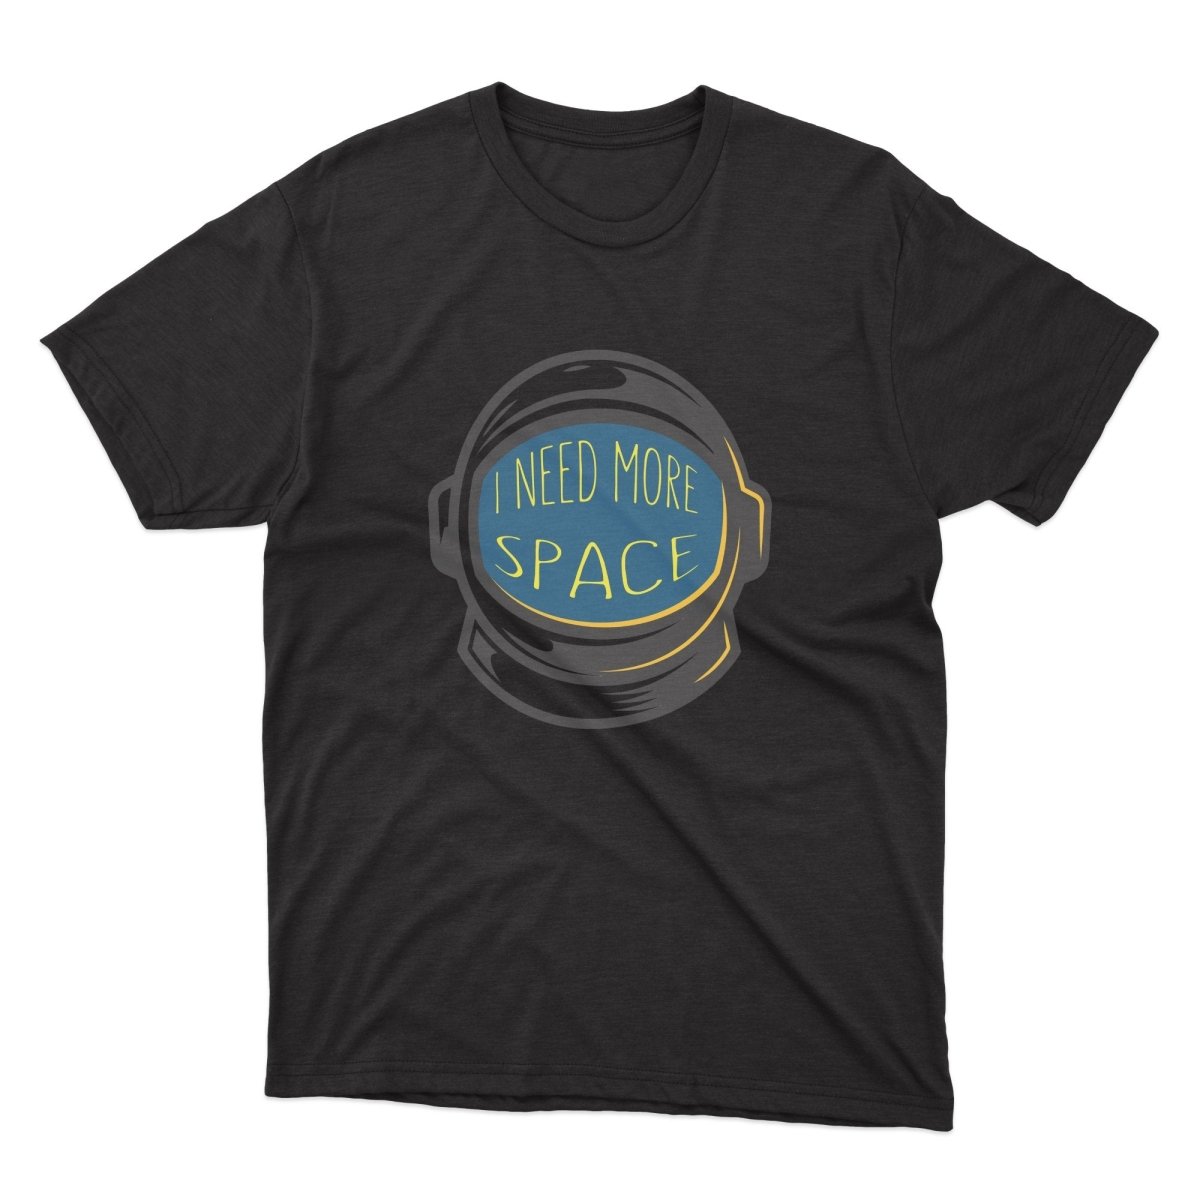 I Need More Space Shirt - stickerbullI Need More Space ShirtShirtsPrintifystickerbull14067852097550272443BlackSa black t - shirt with the words need more space on it